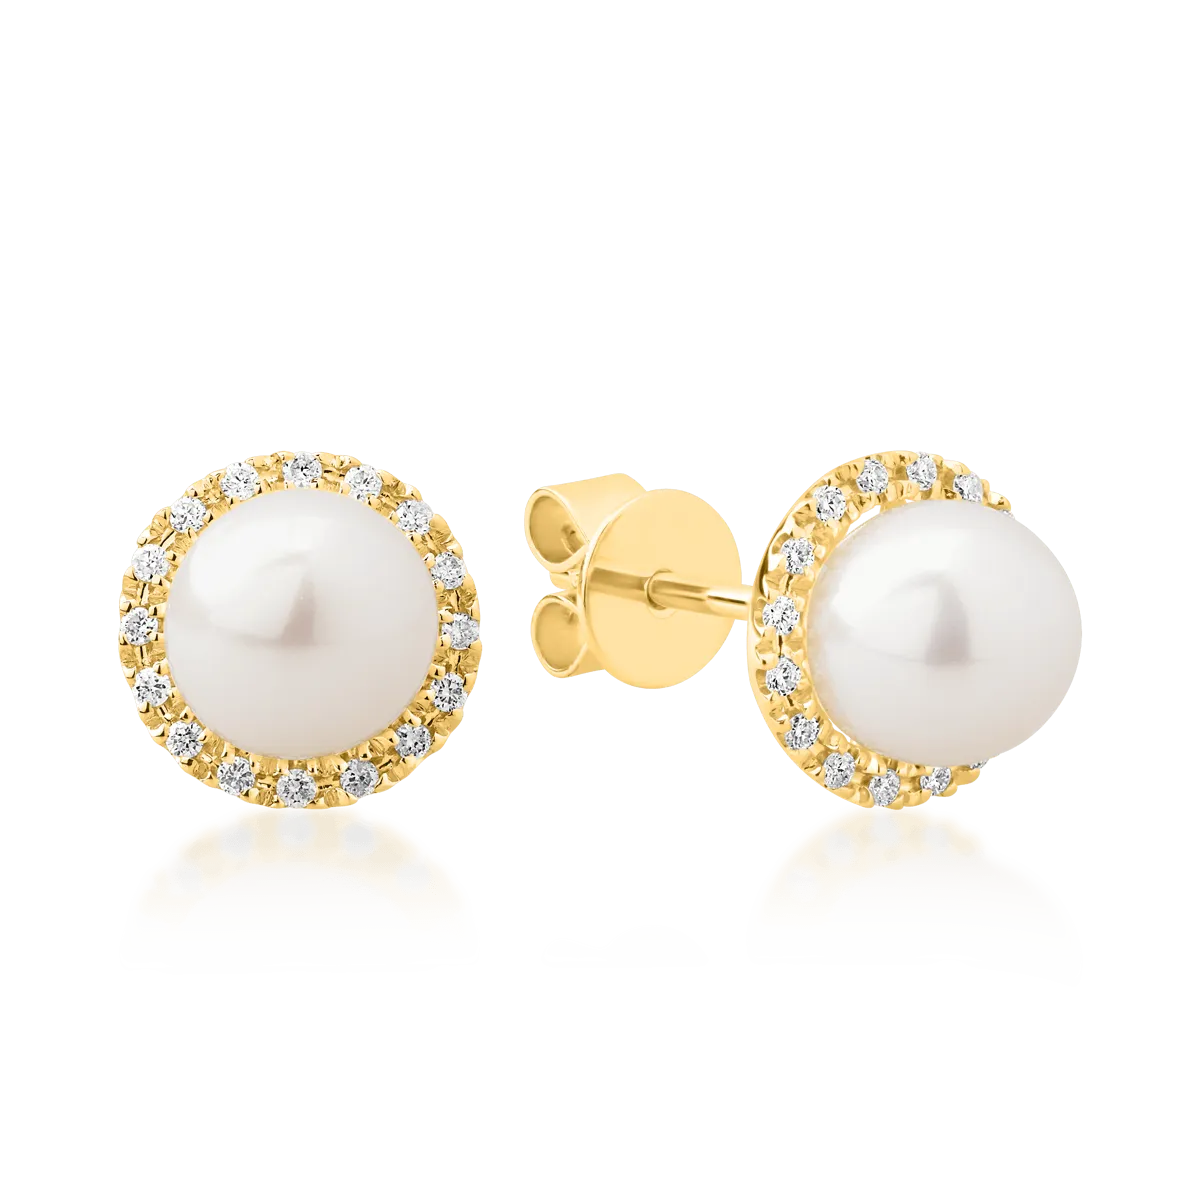 14K yellow gold earrings with 2ct fresh water pearls and 0.11ct diamonds